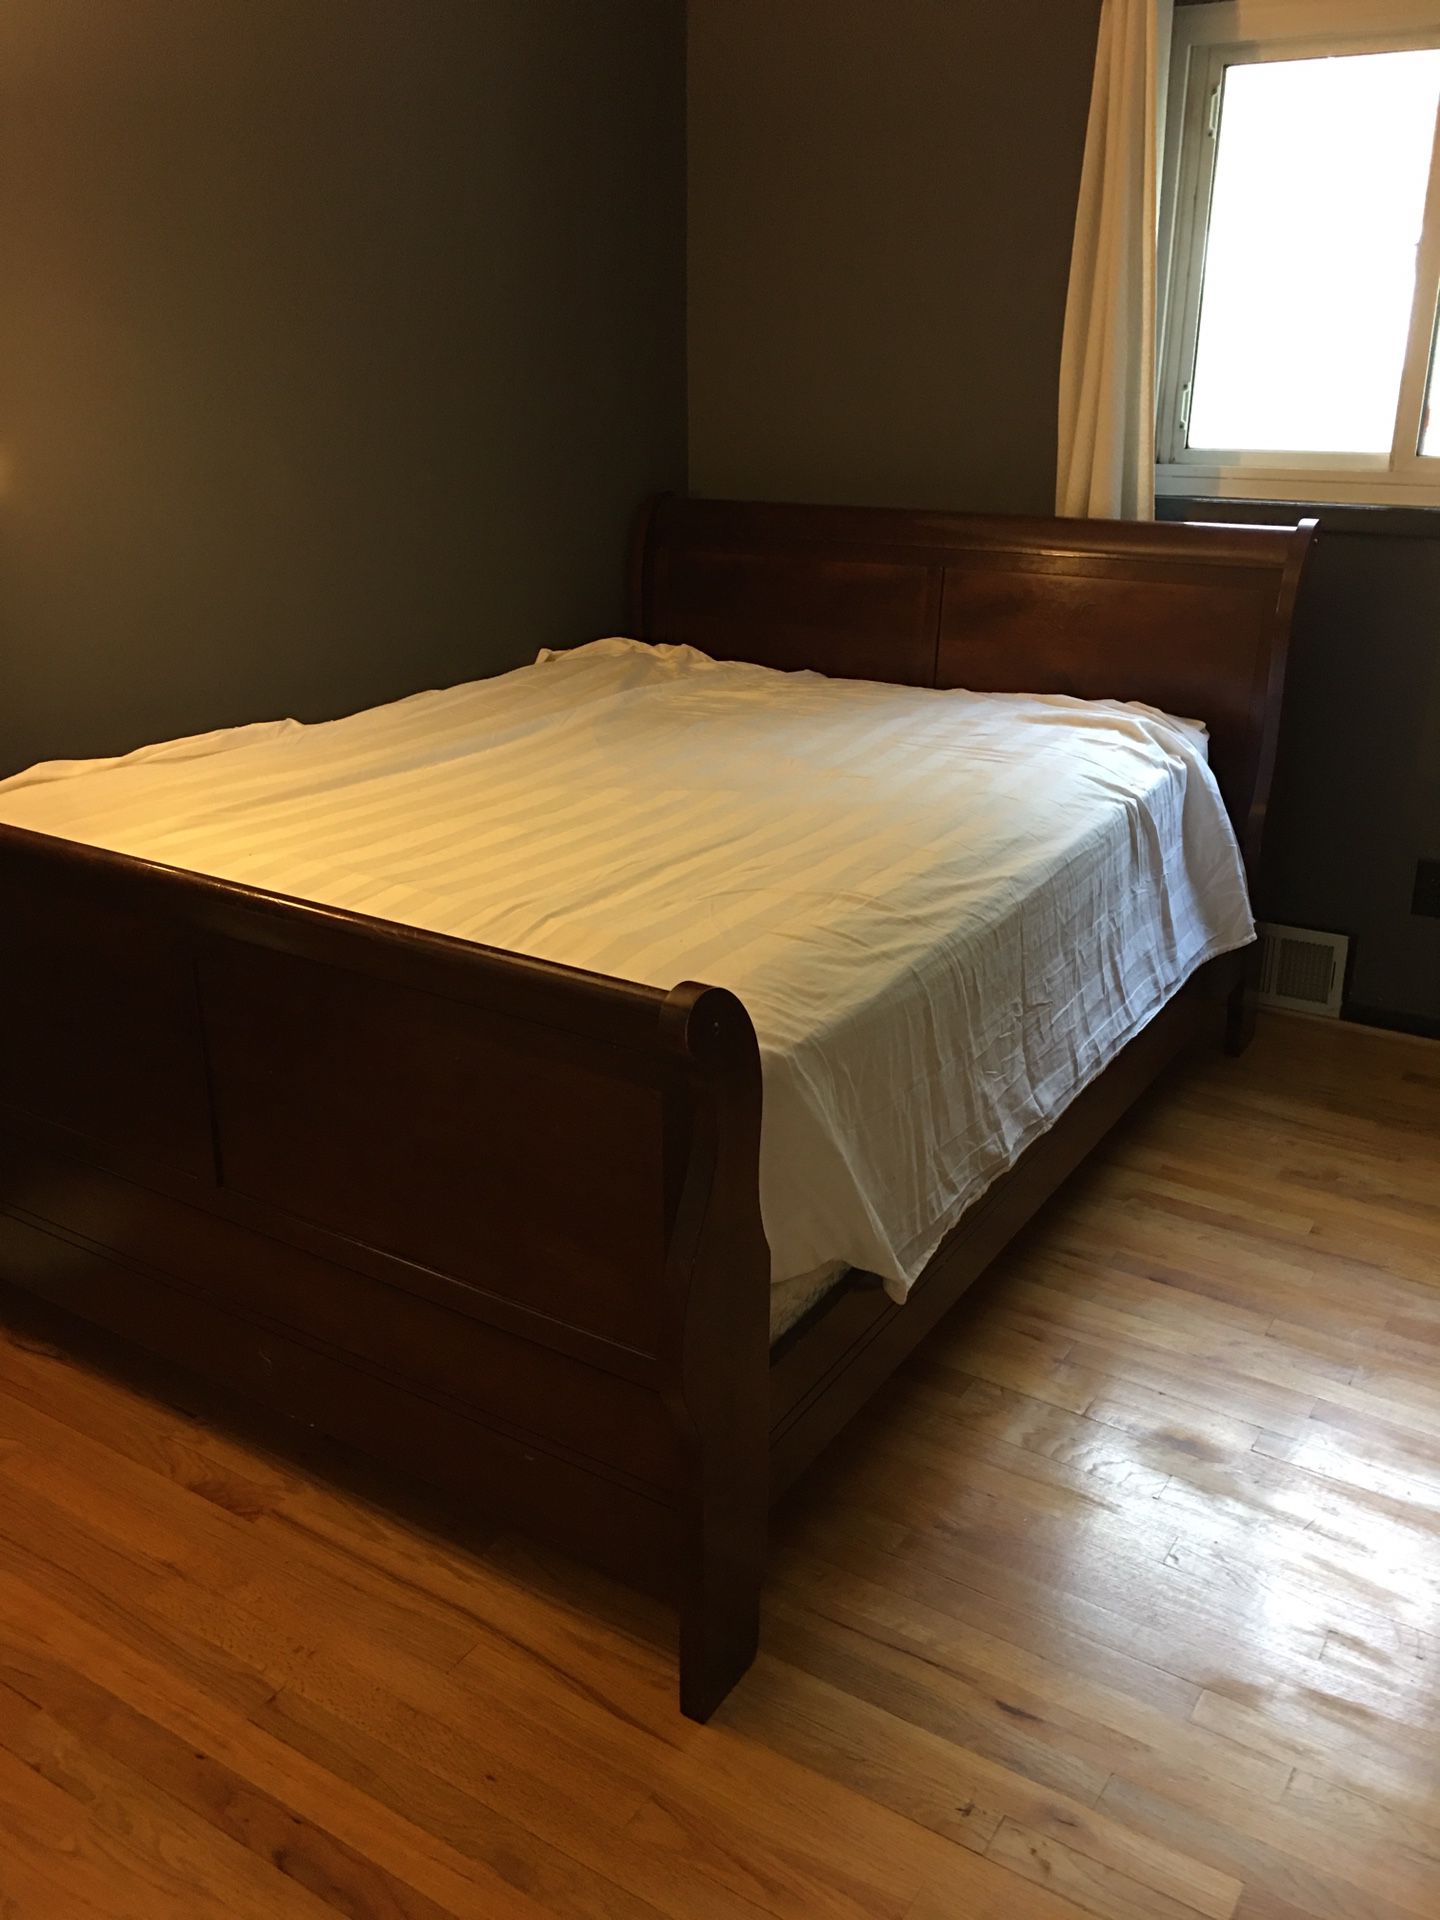 Queen size frame with mattress and box spring